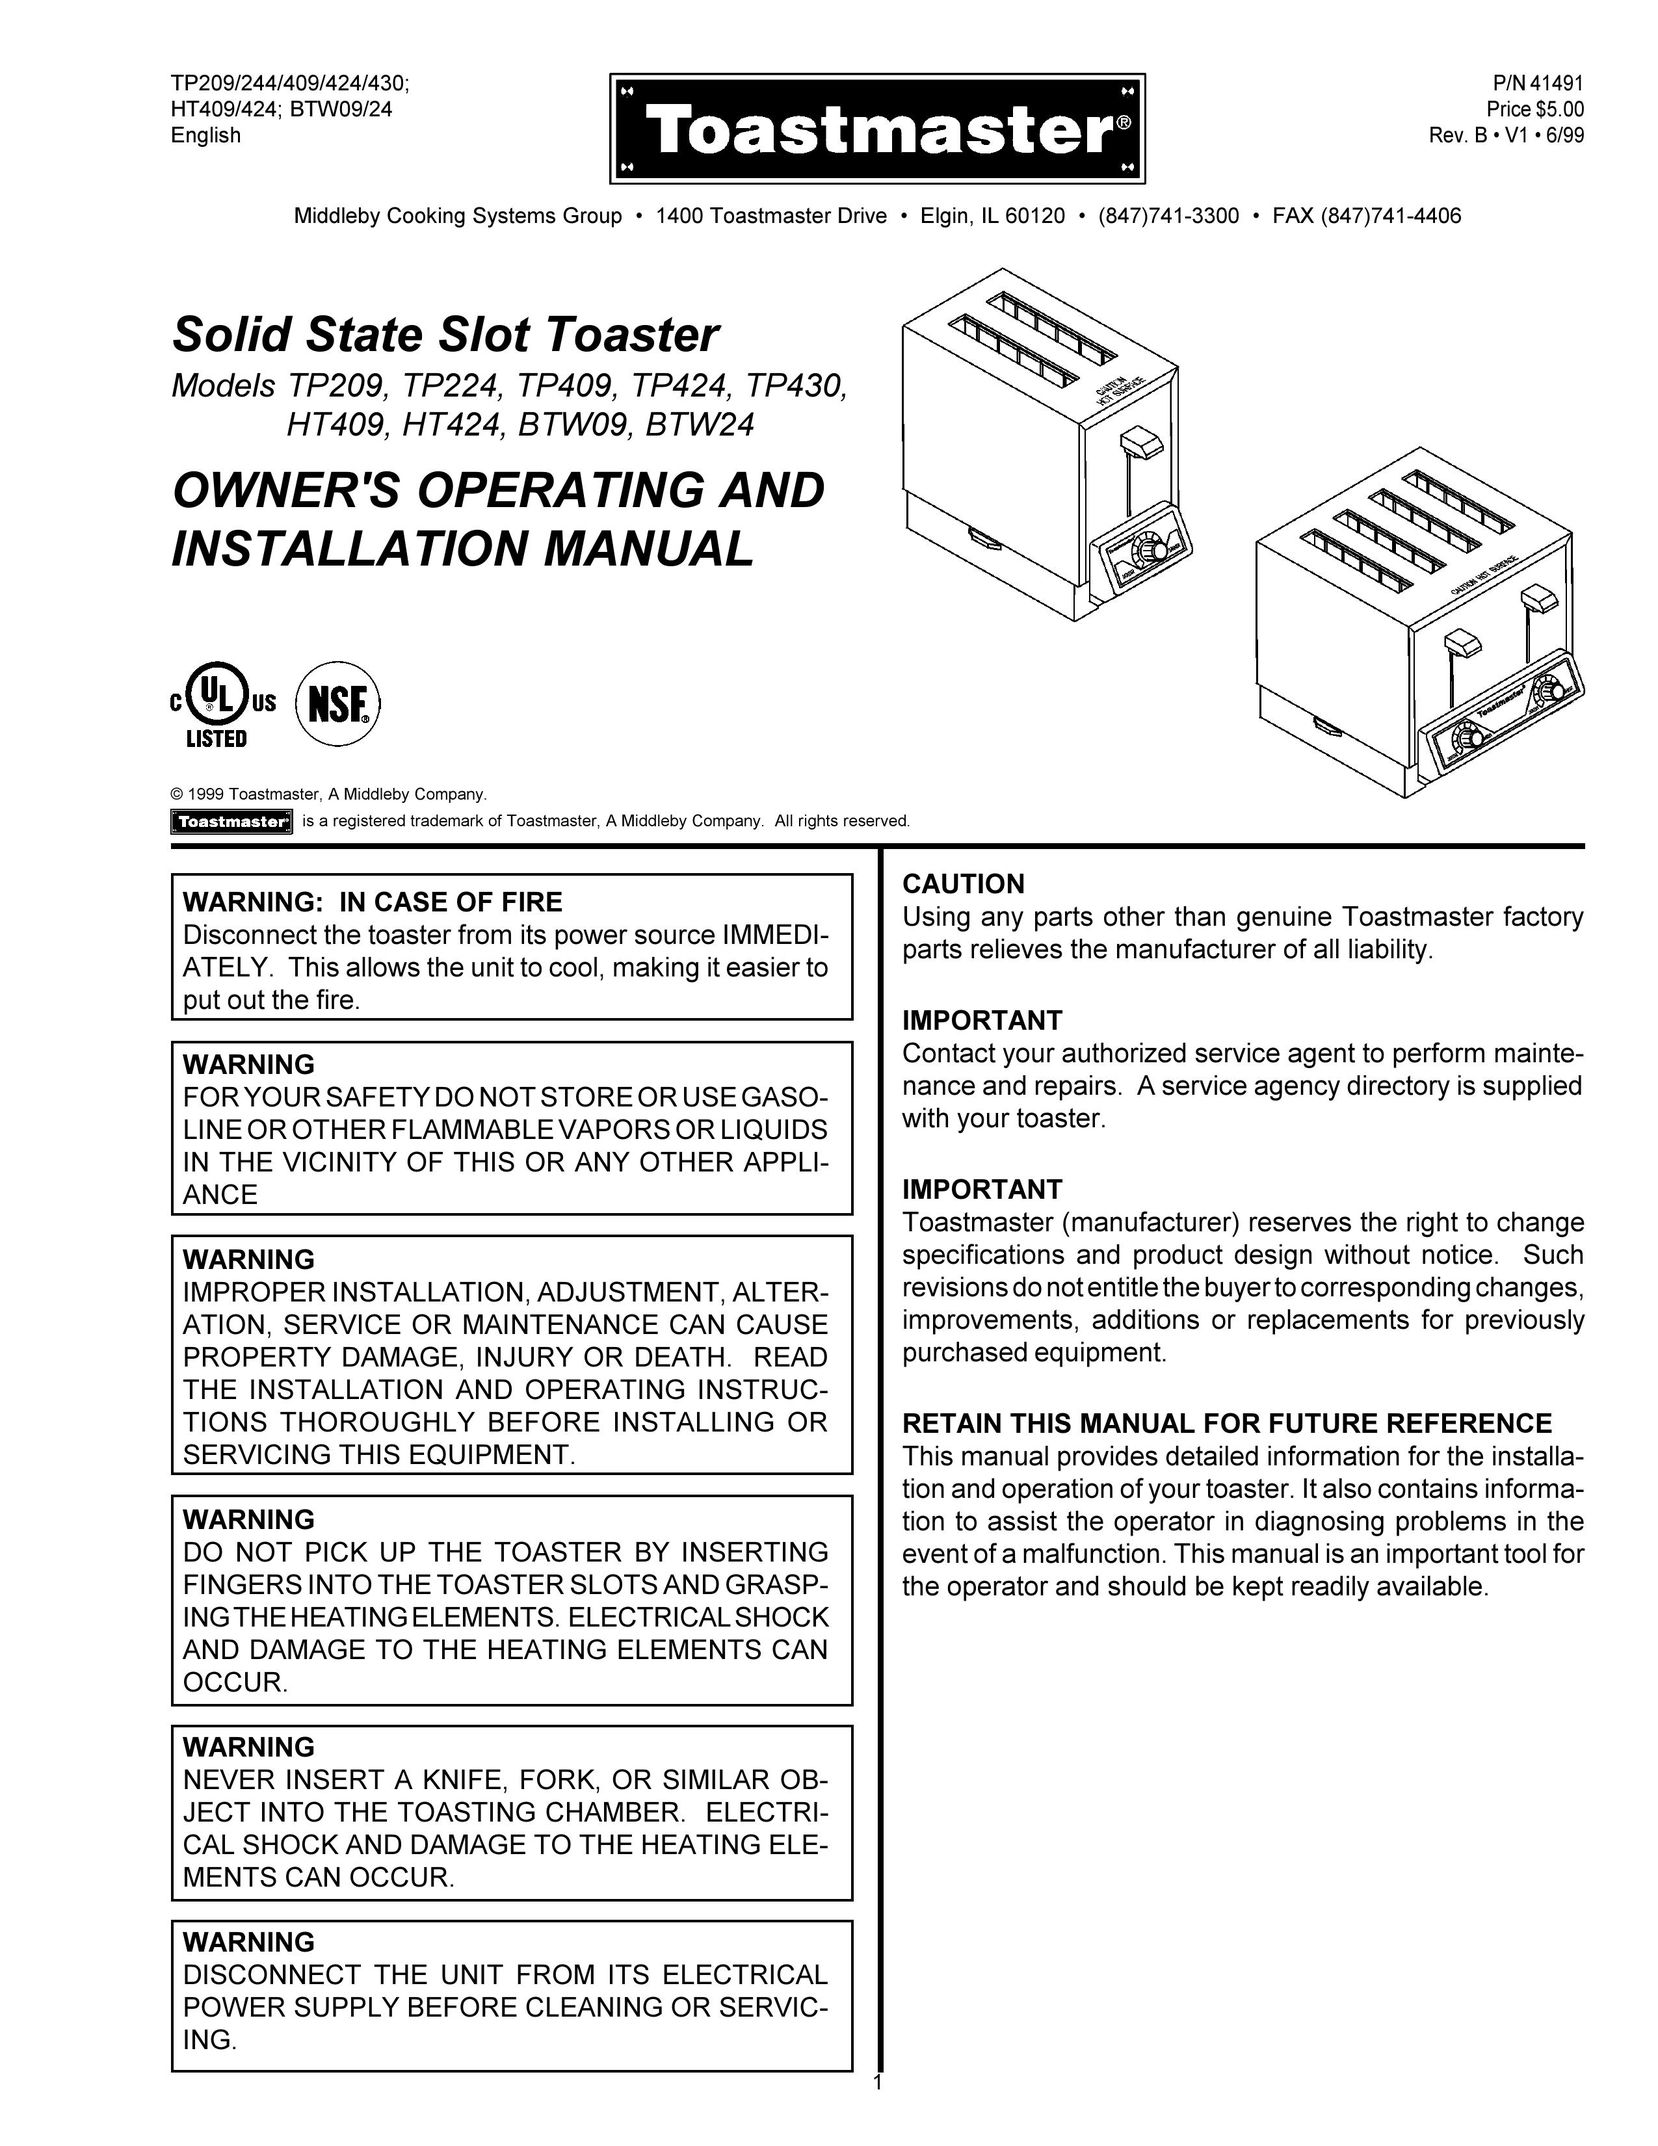 Toastmaster HT424 Car Stereo System User Manual